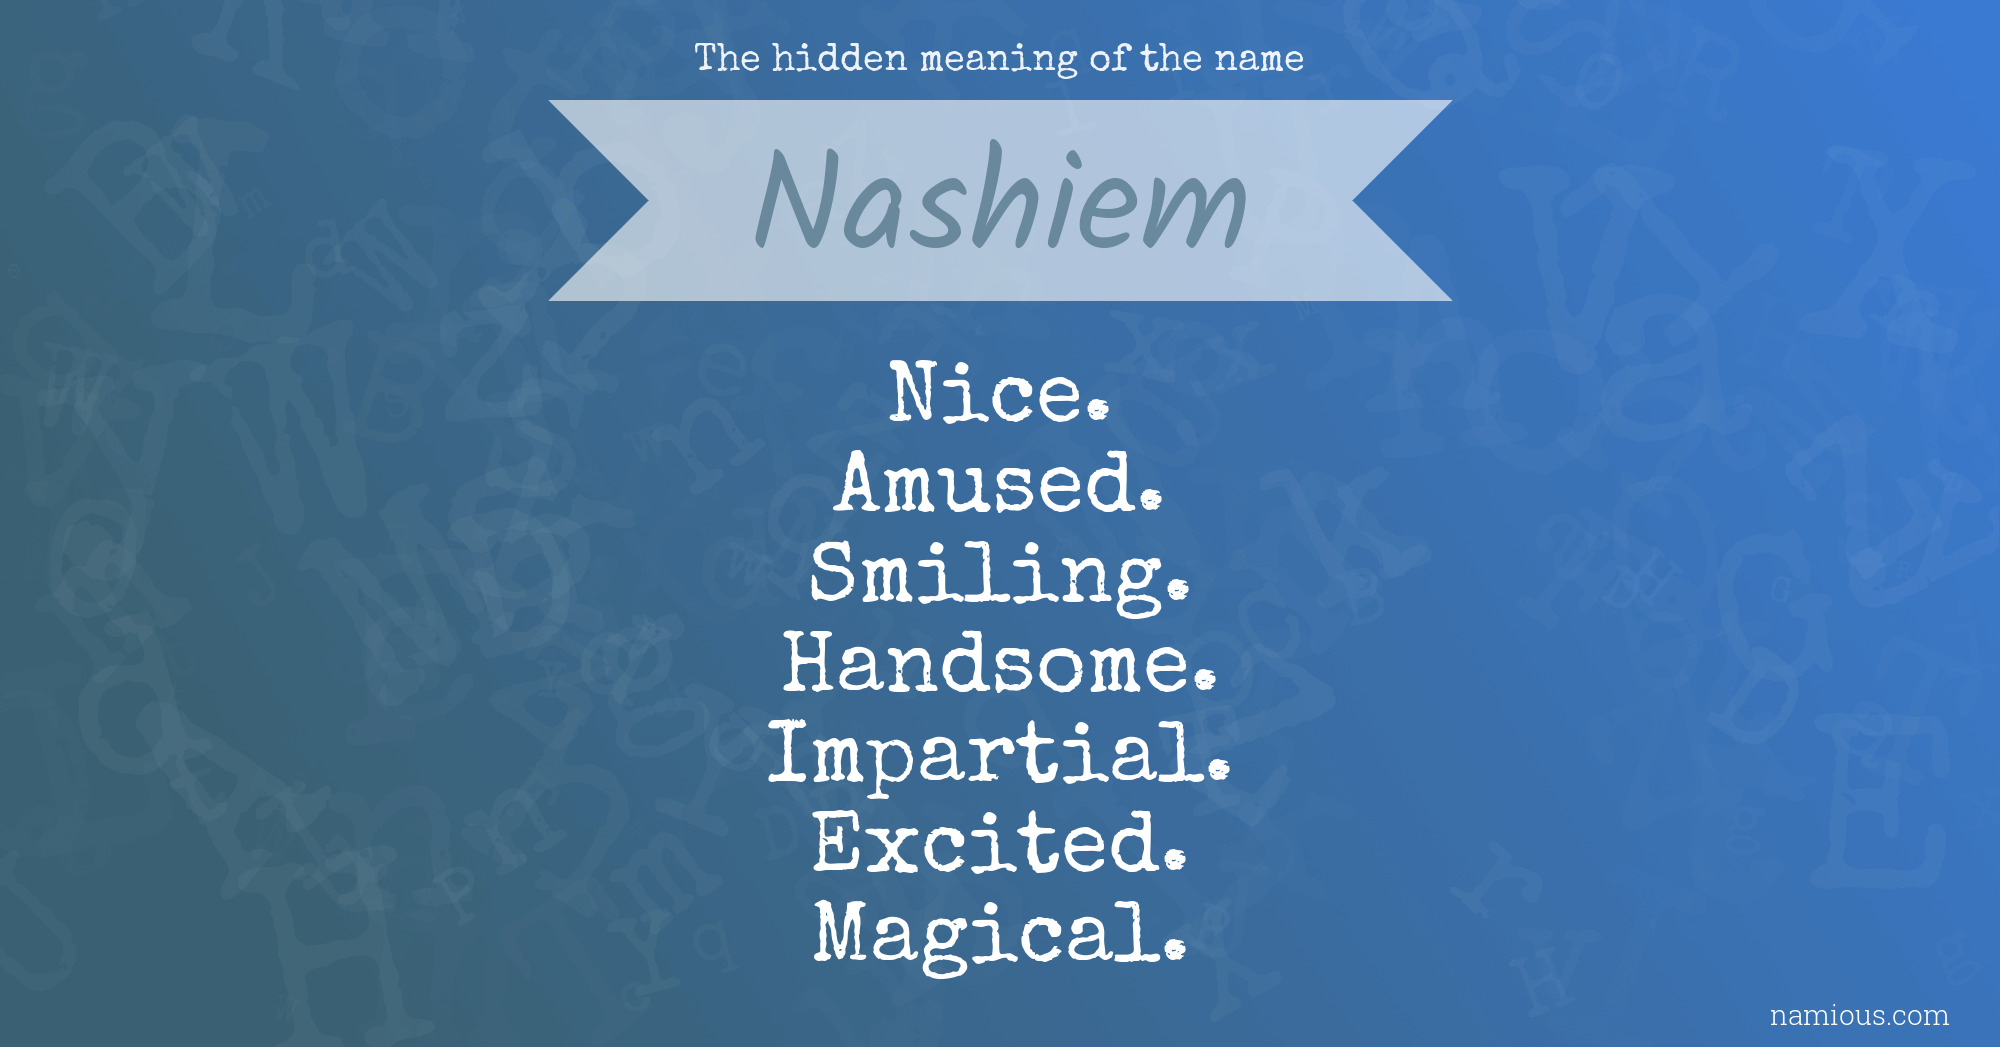 The hidden meaning of the name Nashiem